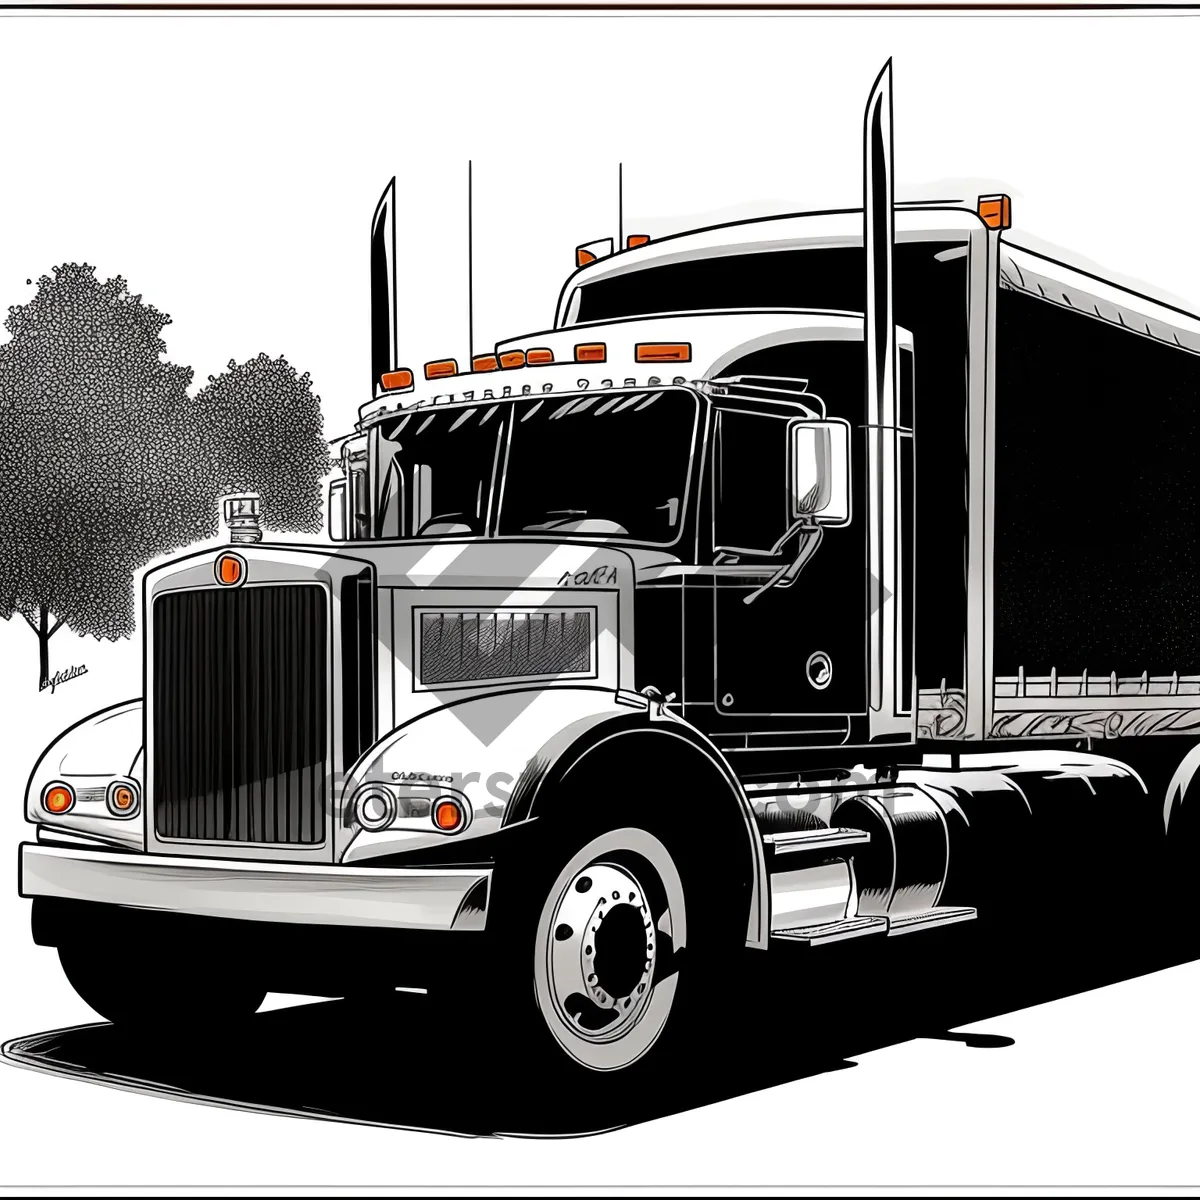 Picture of Transportation Freight: Trailer Truck for Efficient Shipping